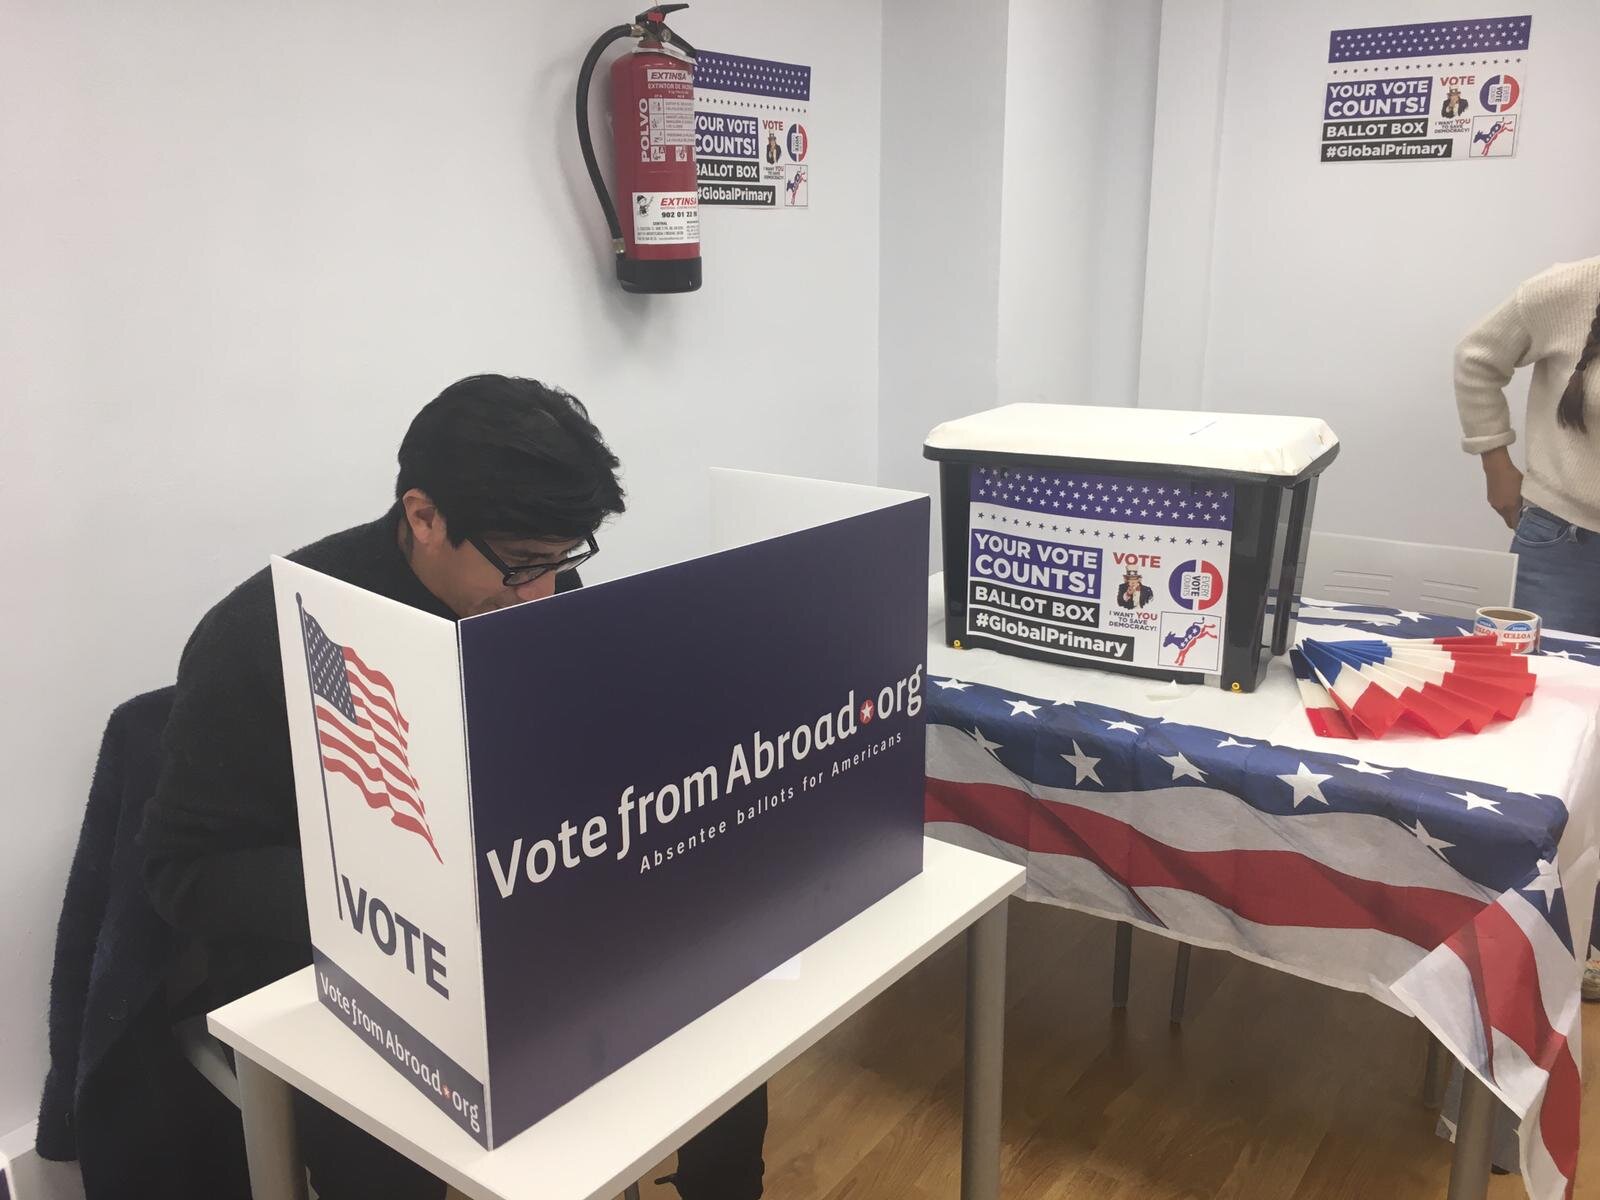 A voter at the Democrats Abroad polling event on March 3rd, 2020